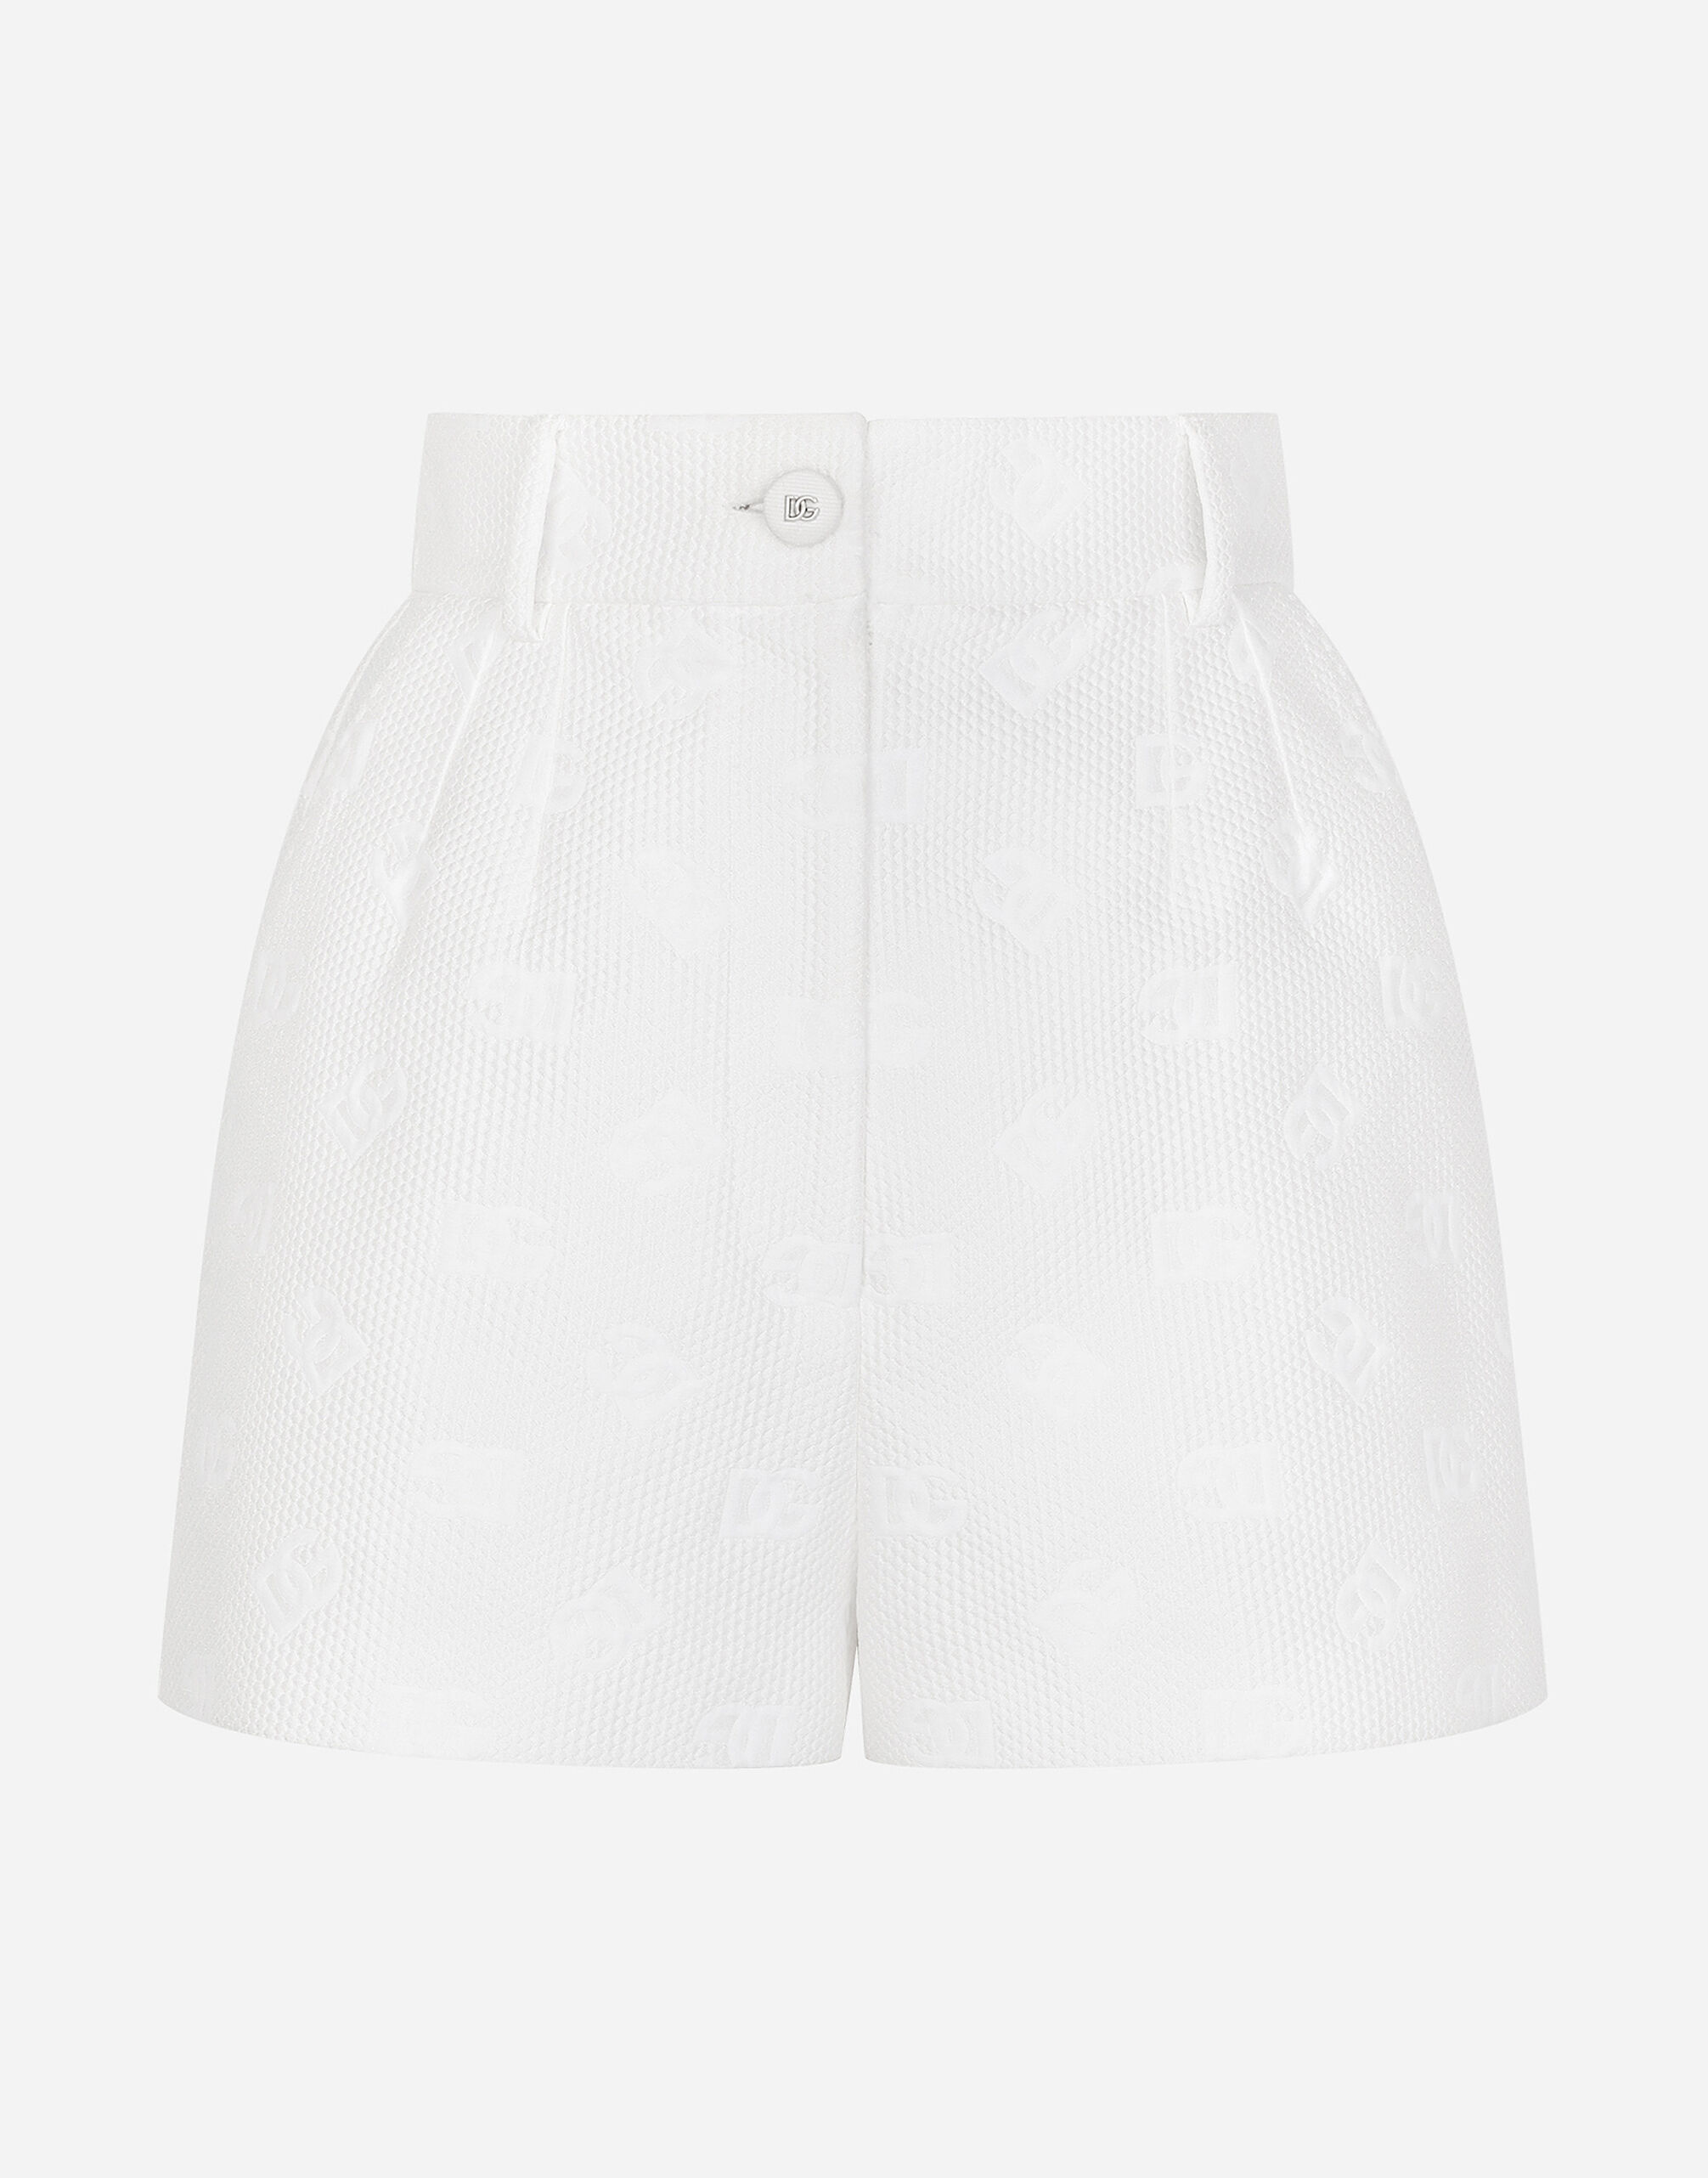 Dolce & Gabbana Jacquard shorts with all-over DG logo Print FTC4STHI1TK